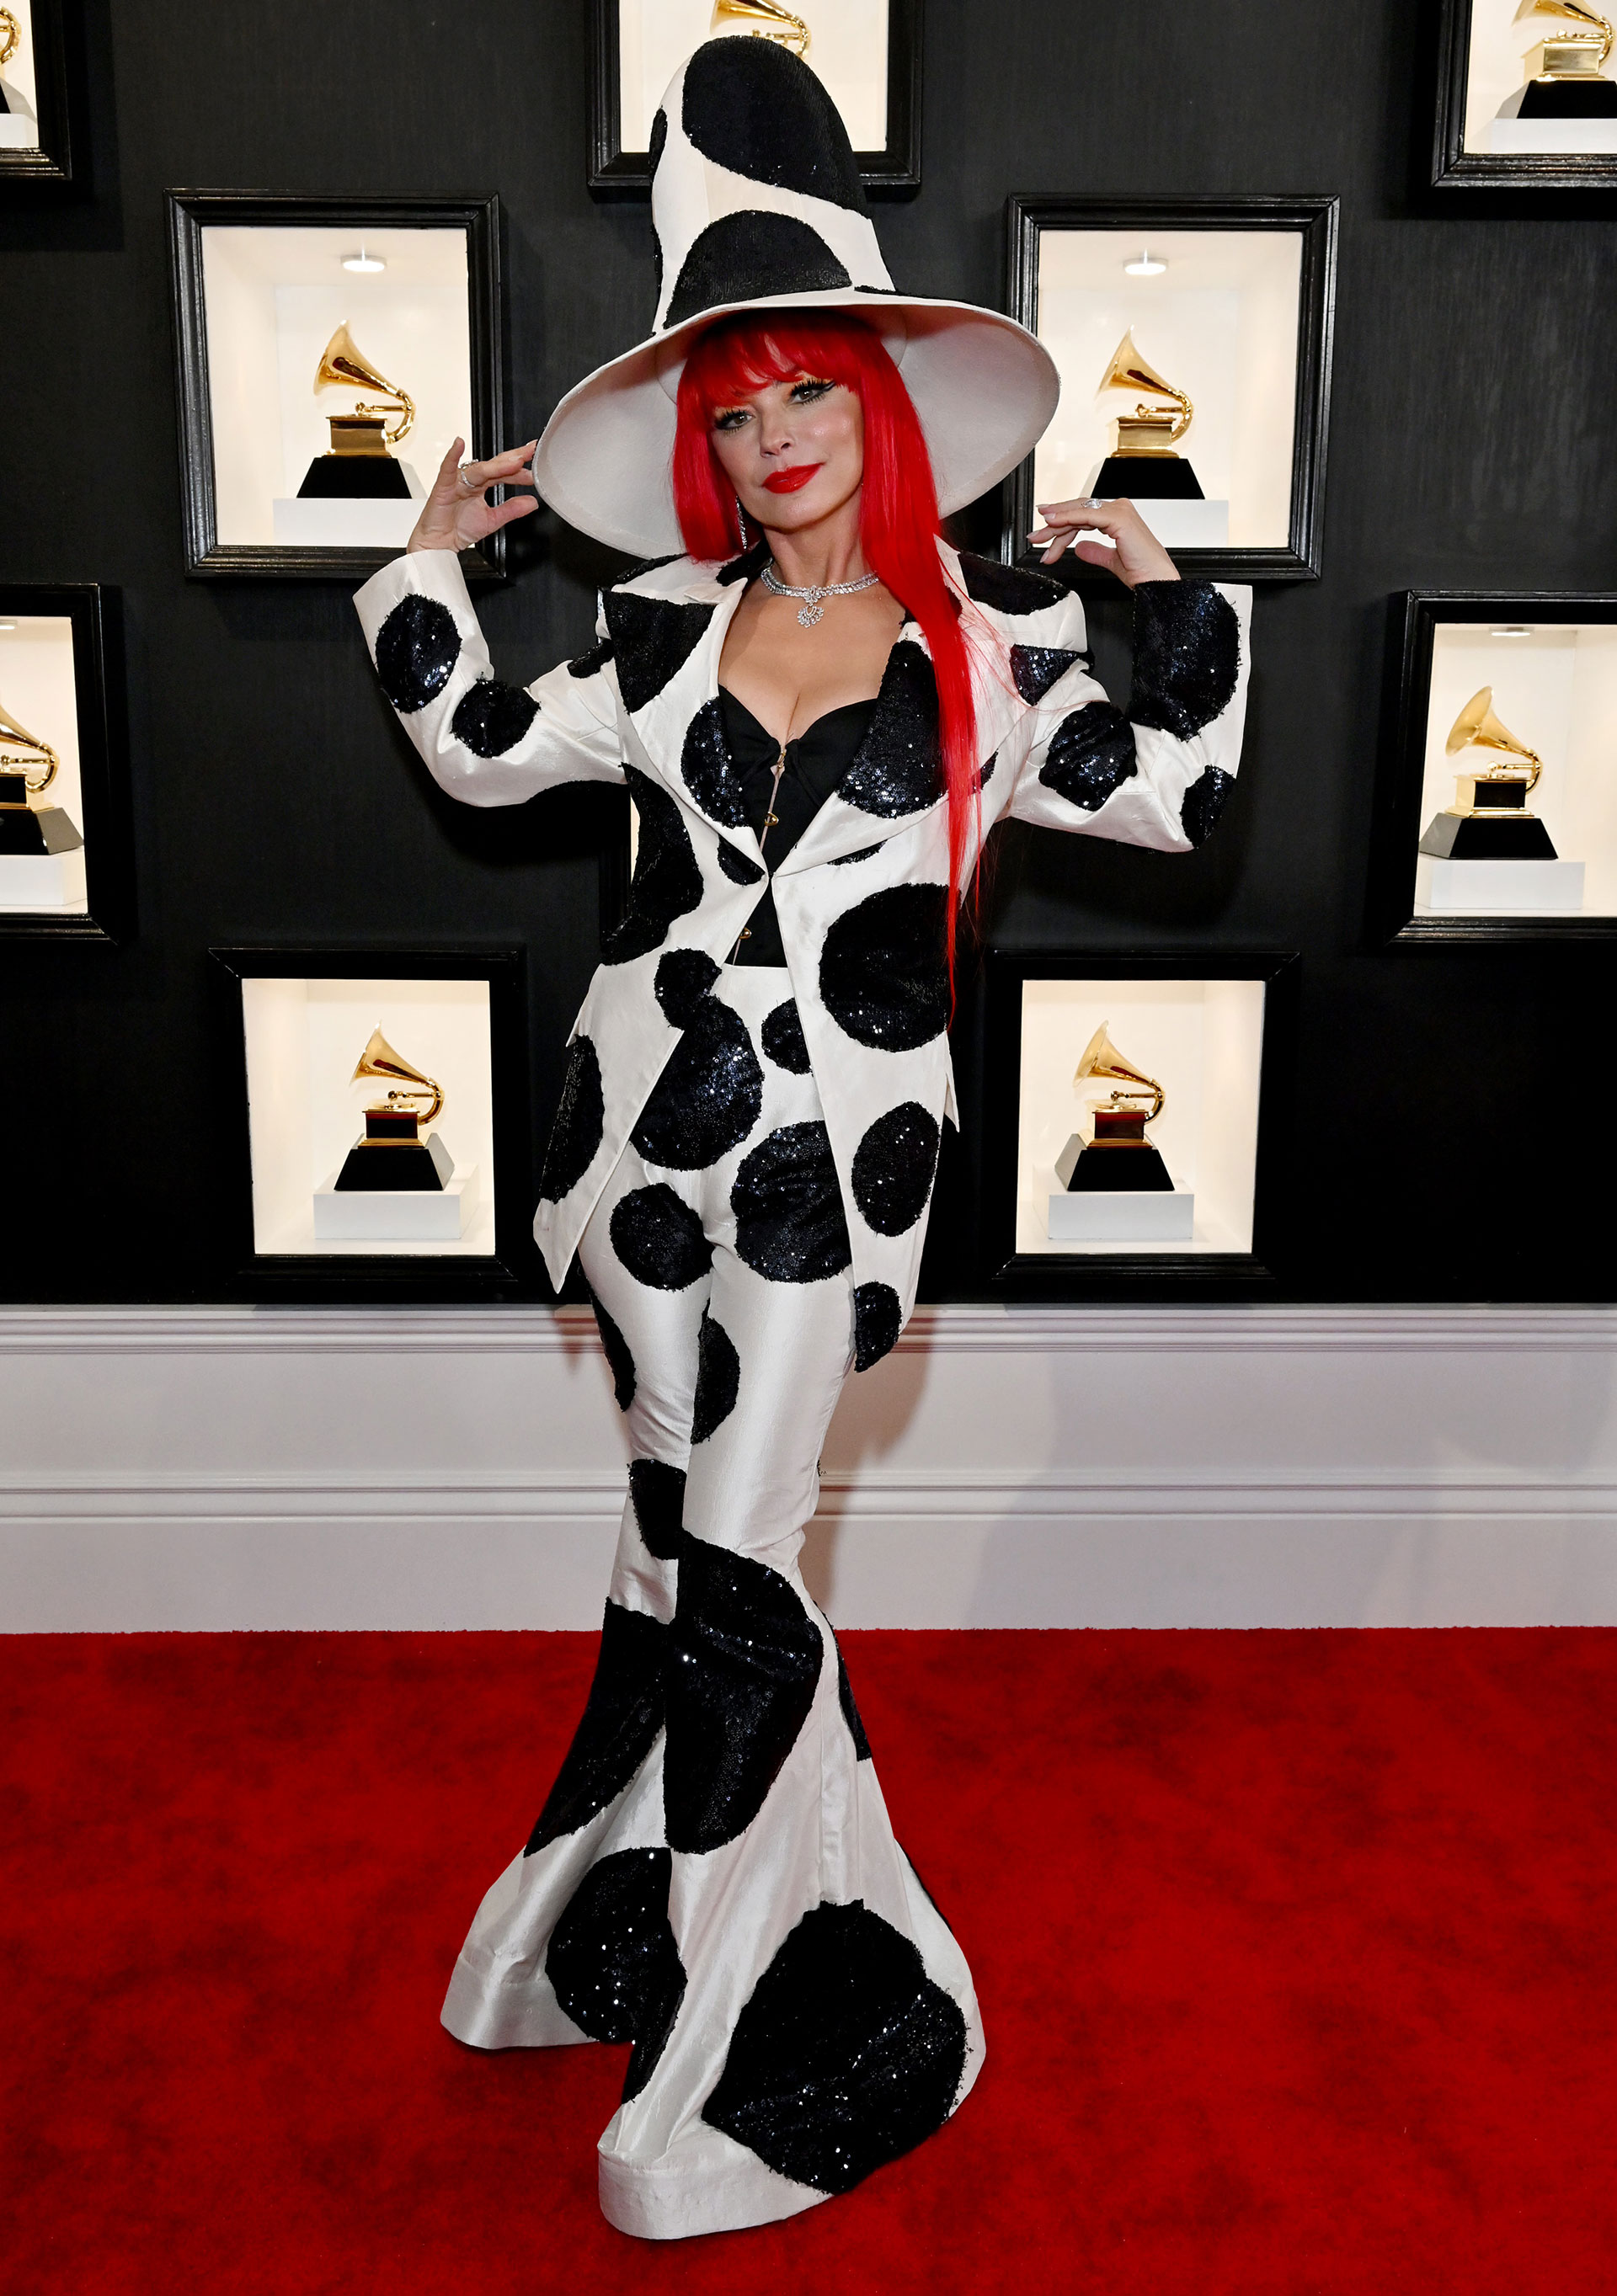 The singer Shania Twain opted for an eccentric look (Gettyimages)